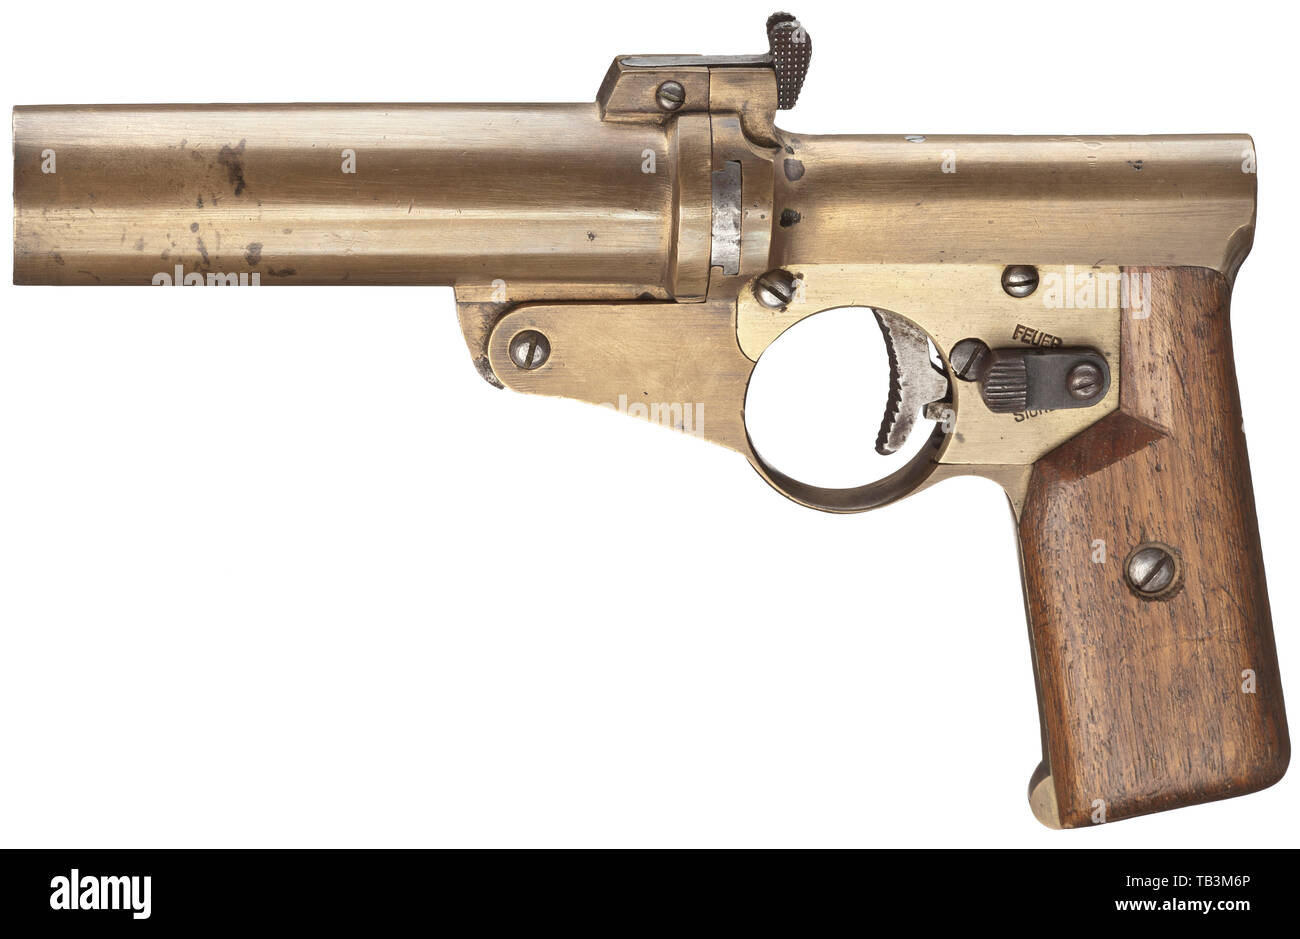 A single-barrelled signal flare pistol Mod. A.W.W. of the Imperial Navy, Cal. 4, no. 37. Matching numbers. Drop barrel with snapper lock, length 115 mm. Total length 220 mm. Weight 860 g. Internal hammer. Safety. Signal pin. Construction attributed to Artilleriewerkstätten Wilhelmshaven (A.W.W.). On pommel navy acceptance mark crown/M. No further stamps or inscriptions. Brass grip frame and barrel. Ribbed trigger as well as opening lever, breechblock, safety, mechanical parts and screws made of steel. Matching-numbered, smooth walnut grip panels., Additional-Rights-Clearance-Info-Not-Available Stock Photo